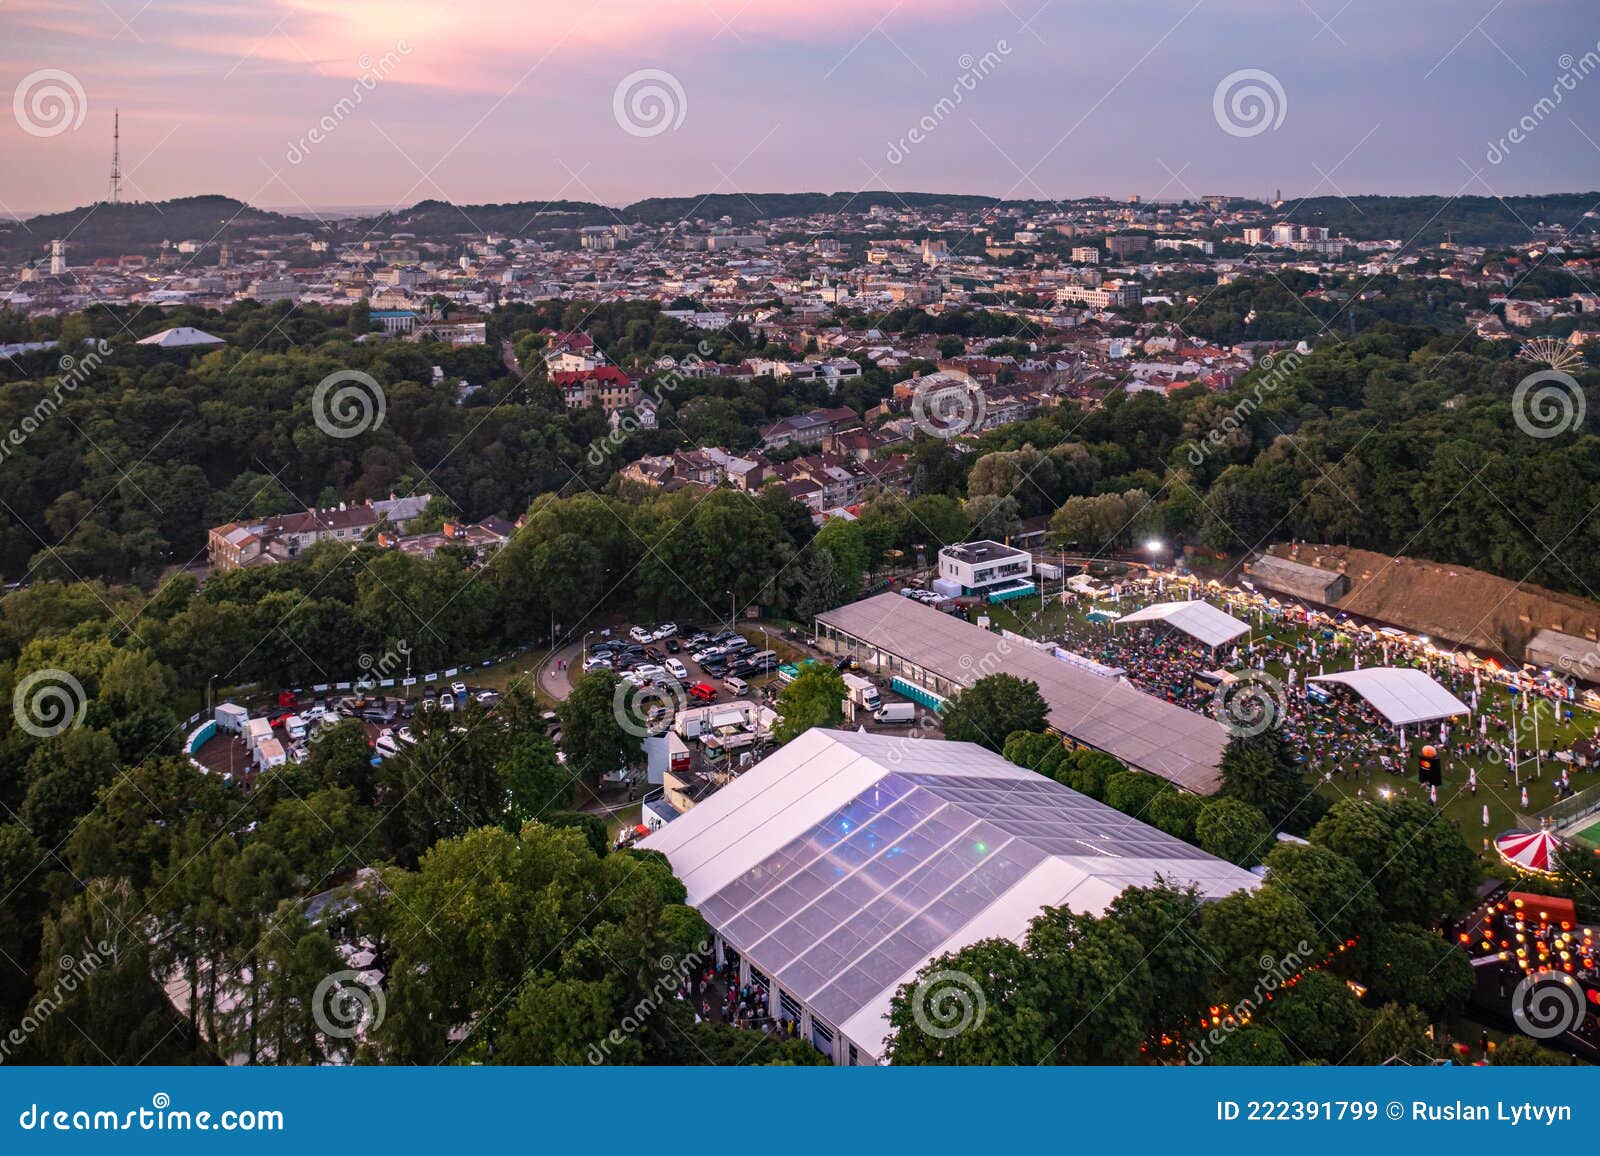 leopolis jazz fest 2021. stage dedicated to eddie rosner. picnic zone. aerial view from drone